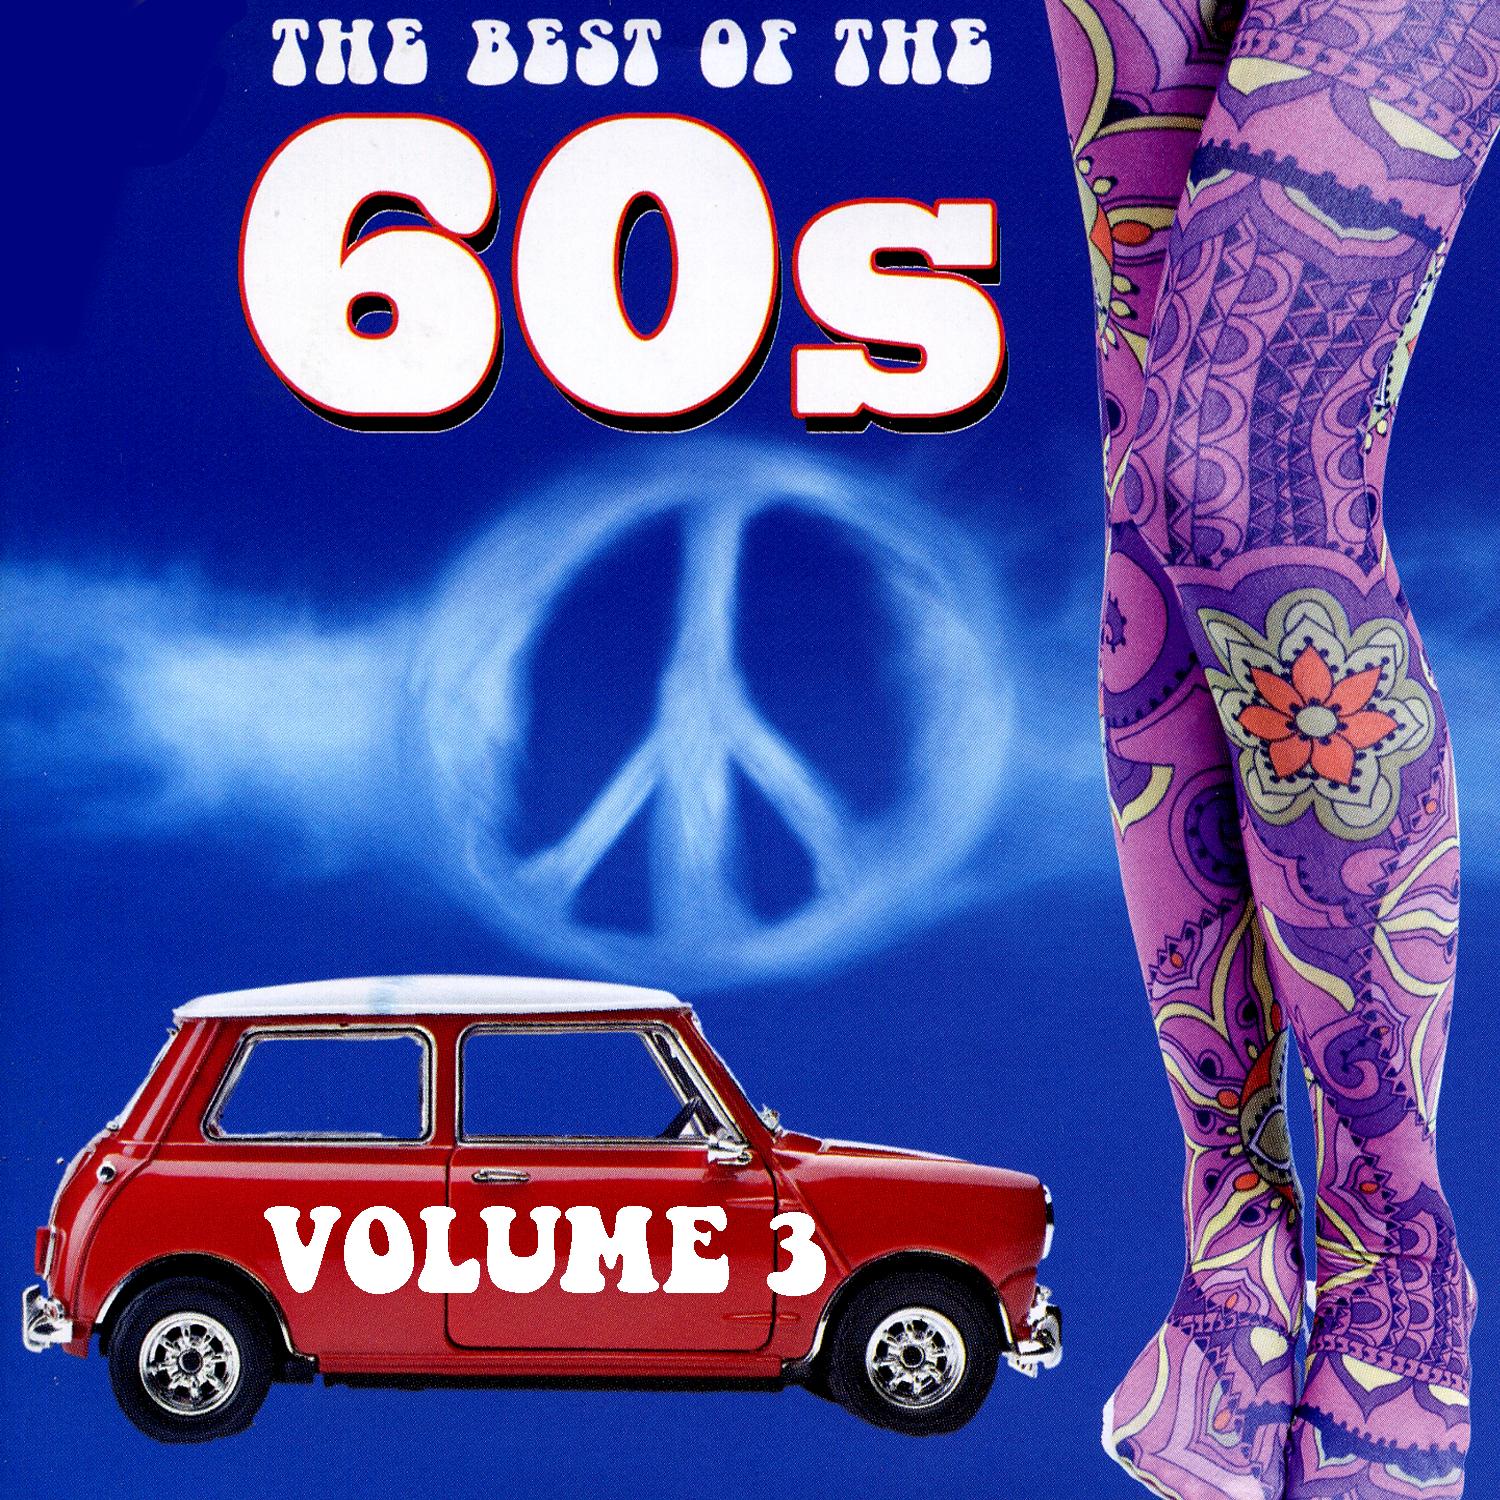 The Best Of The 60's Volume 3